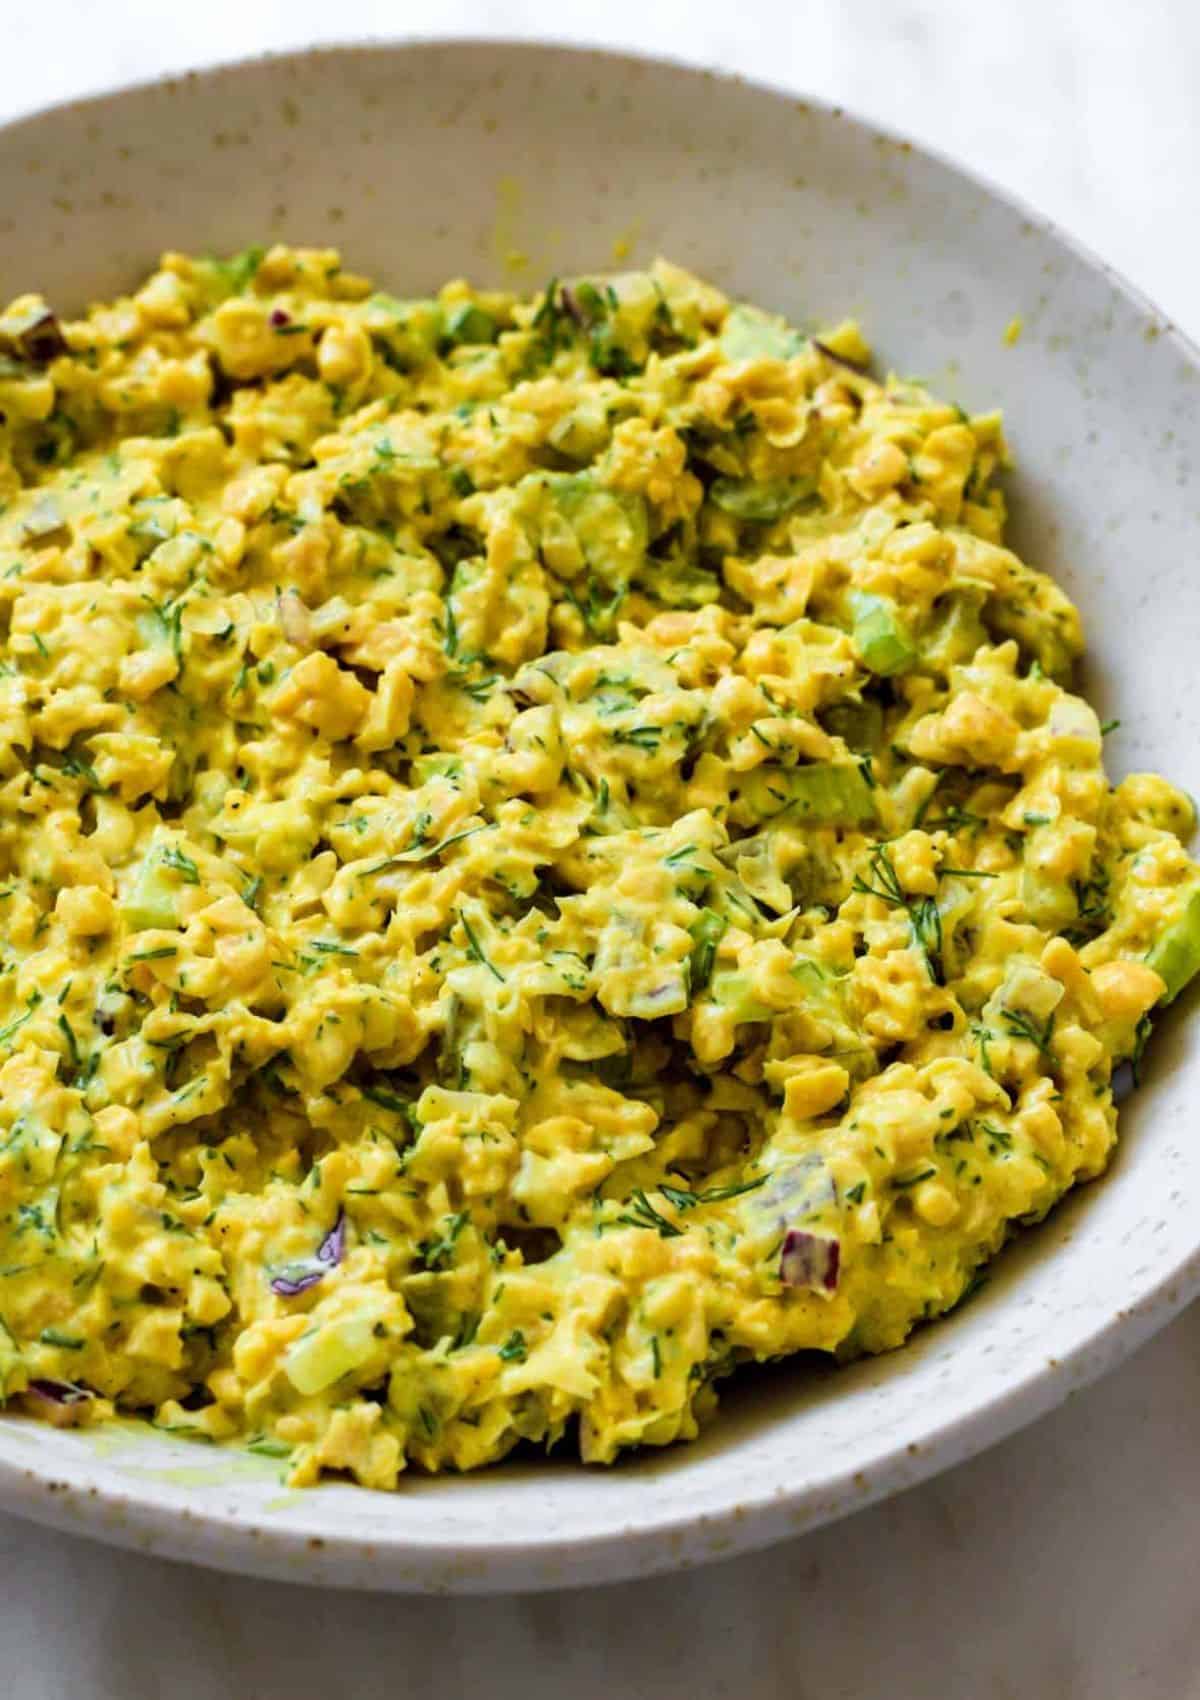 Yellow mashed chickpeas with green flecks in a bowl.